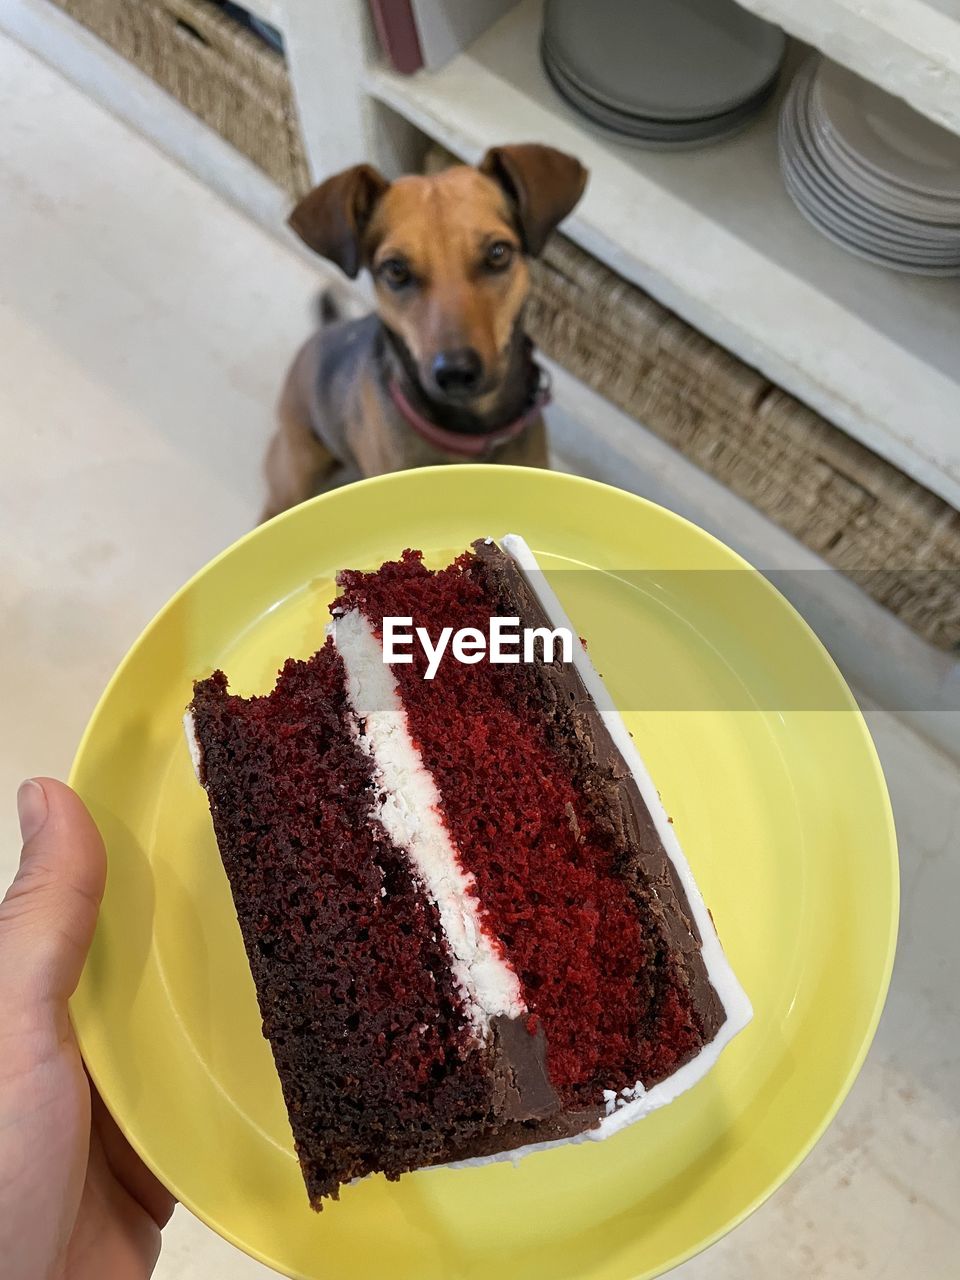 Piece of red velvet cake on a yellow plate. a dog looking towards the cake.